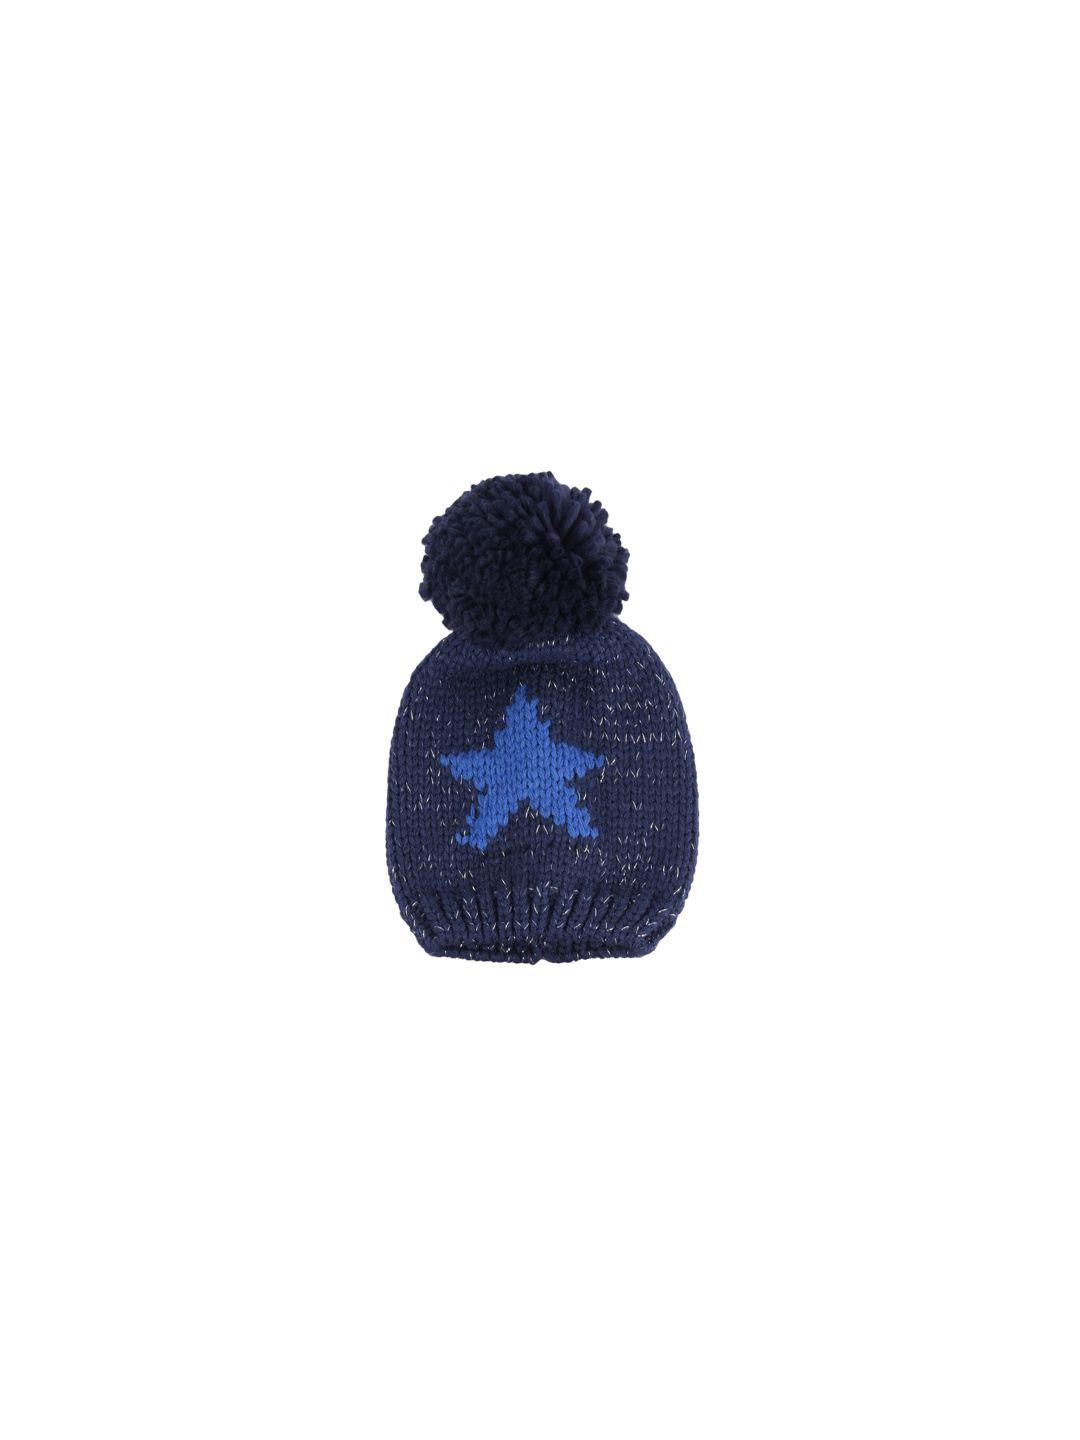 yellow bee kids navy blue star patterned knitted beanie cap